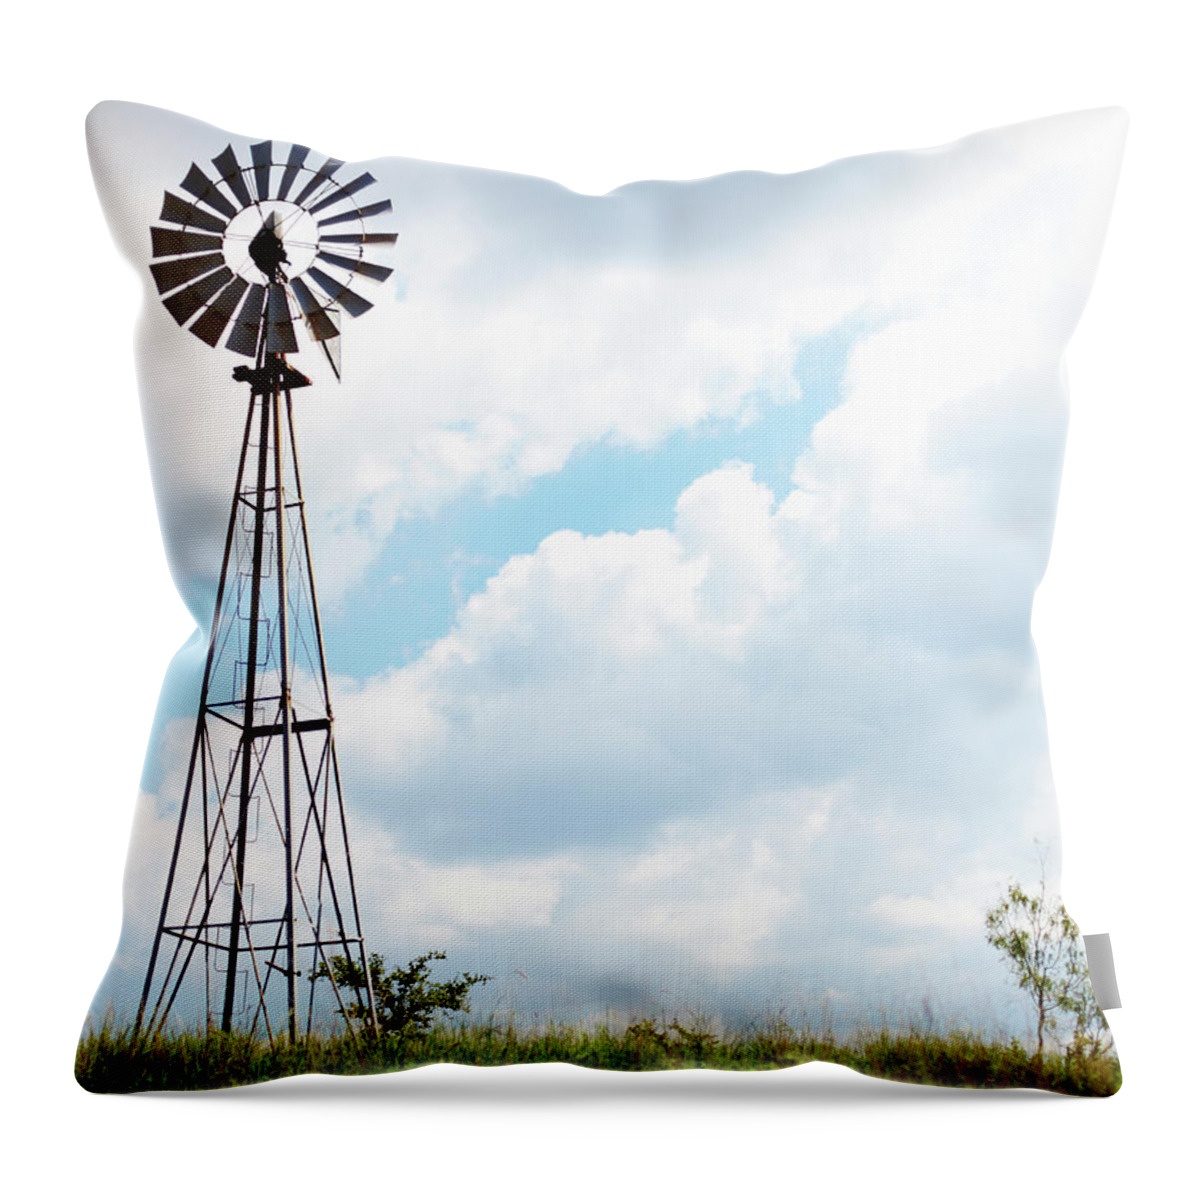 Environmental Conservation Throw Pillow featuring the photograph Wind Turbine In Field by Thomas Northcut